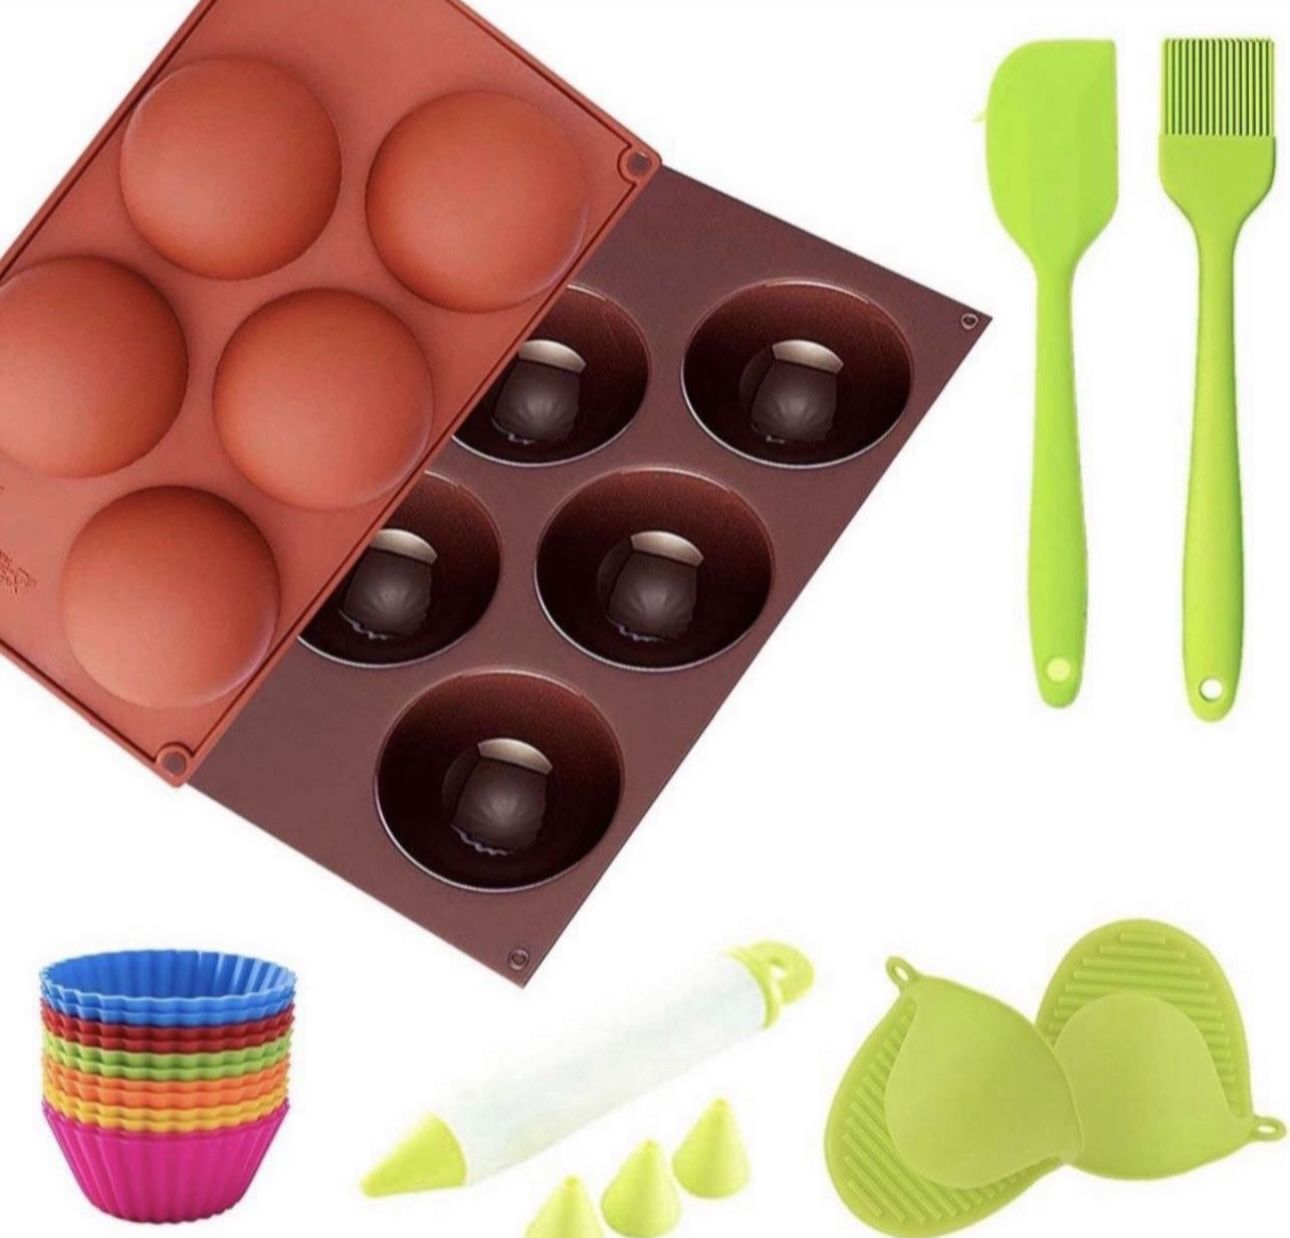 WYRRAL Semi Sphere Silicone Mold, 13 Pcs Set- Half Sphere Silicone Baking Molds for Making Chocolate, Cake, Jelly, Dome, Mousse, Ball Molds for Baking